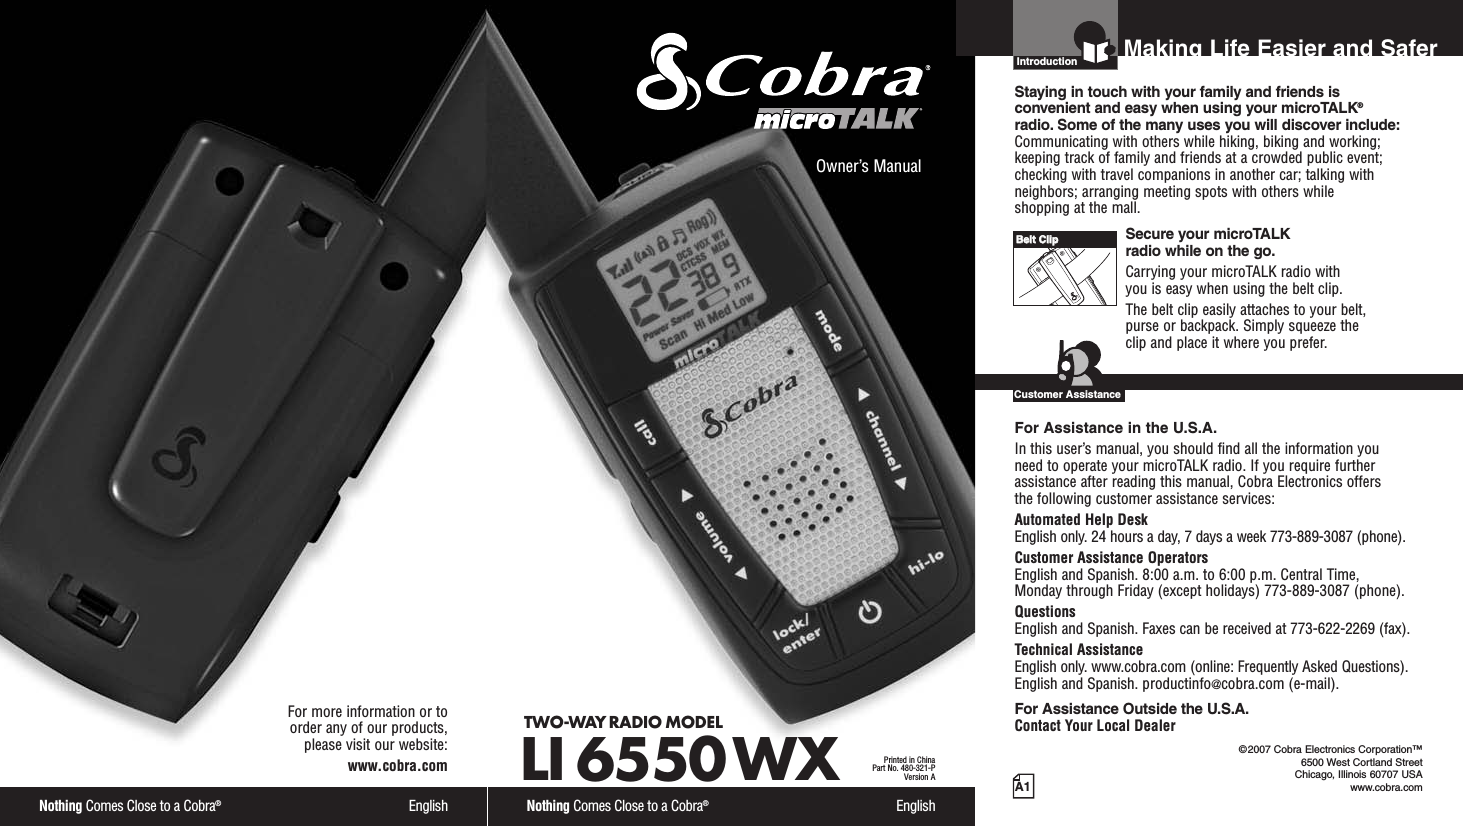 Nothing Comes Close to a Cobra®EnglishFor more information or to order any of our products, please visit our website:www.cobra.comA1Making Life Easier and SaferOwner’s ManualNothing Comes Close to a Cobra®EnglishTWO-WAY RADIO MODEL LI 6550 WXPrinted in ChinaPart No. 480-321-PVersion AIntro Operation CustomerAssistanceWarrantyNoticeMain IconsSecondary IconsIntroductionStaying in touch with your family and friends is convenient and easy when using your microTALK®radio. Some of the many uses you will discover include:Communicating with others while hiking, biking and working;keeping track of family and friends at a crowded public event;checking with travel companions in another car; talking withneighbors; arranging meeting spots with others while shopping at the mall.Secure your microTALK radio while on the go.Carrying your microTALK radio with you is easy when using the belt clip. The belt clip easily attaches to your belt, purse or backpack. Simply squeeze the clip and place it where you prefer.For Assistance in the U.S.A.In this user’s manual, you should find all the information you need to operate your microTALK radio. If you require furtherassistance after reading this manual, Cobra Electronics offers the following customer assistance services:Automated Help Desk English only. 24 hours a day, 7 days a week 773-889-3087 (phone). Customer Assistance OperatorsEnglish and Spanish. 8:00 a.m. to 6:00 p.m. Central Time, Monday through Friday (except holidays) 773-889-3087 (phone). QuestionsEnglish and Spanish. Faxes can be received at 773-622-2269 (fax). Technical AssistanceEnglish only. www.cobra.com (online: Frequently Asked Questions). English and Spanish. productinfo@cobra.com (e-mail).For Assistance Outside the U.S.A.Contact Your Local DealerIntro Operation CustomerAssistanceWarrantyNoticeMain IconsSecondary Icons©2007 Cobra Electronics Corporation™6500 West Cortland StreetChicago, Illinois 60707 USAwww.cobra.comCustomer AssistanceBBeelltt CClliipp       